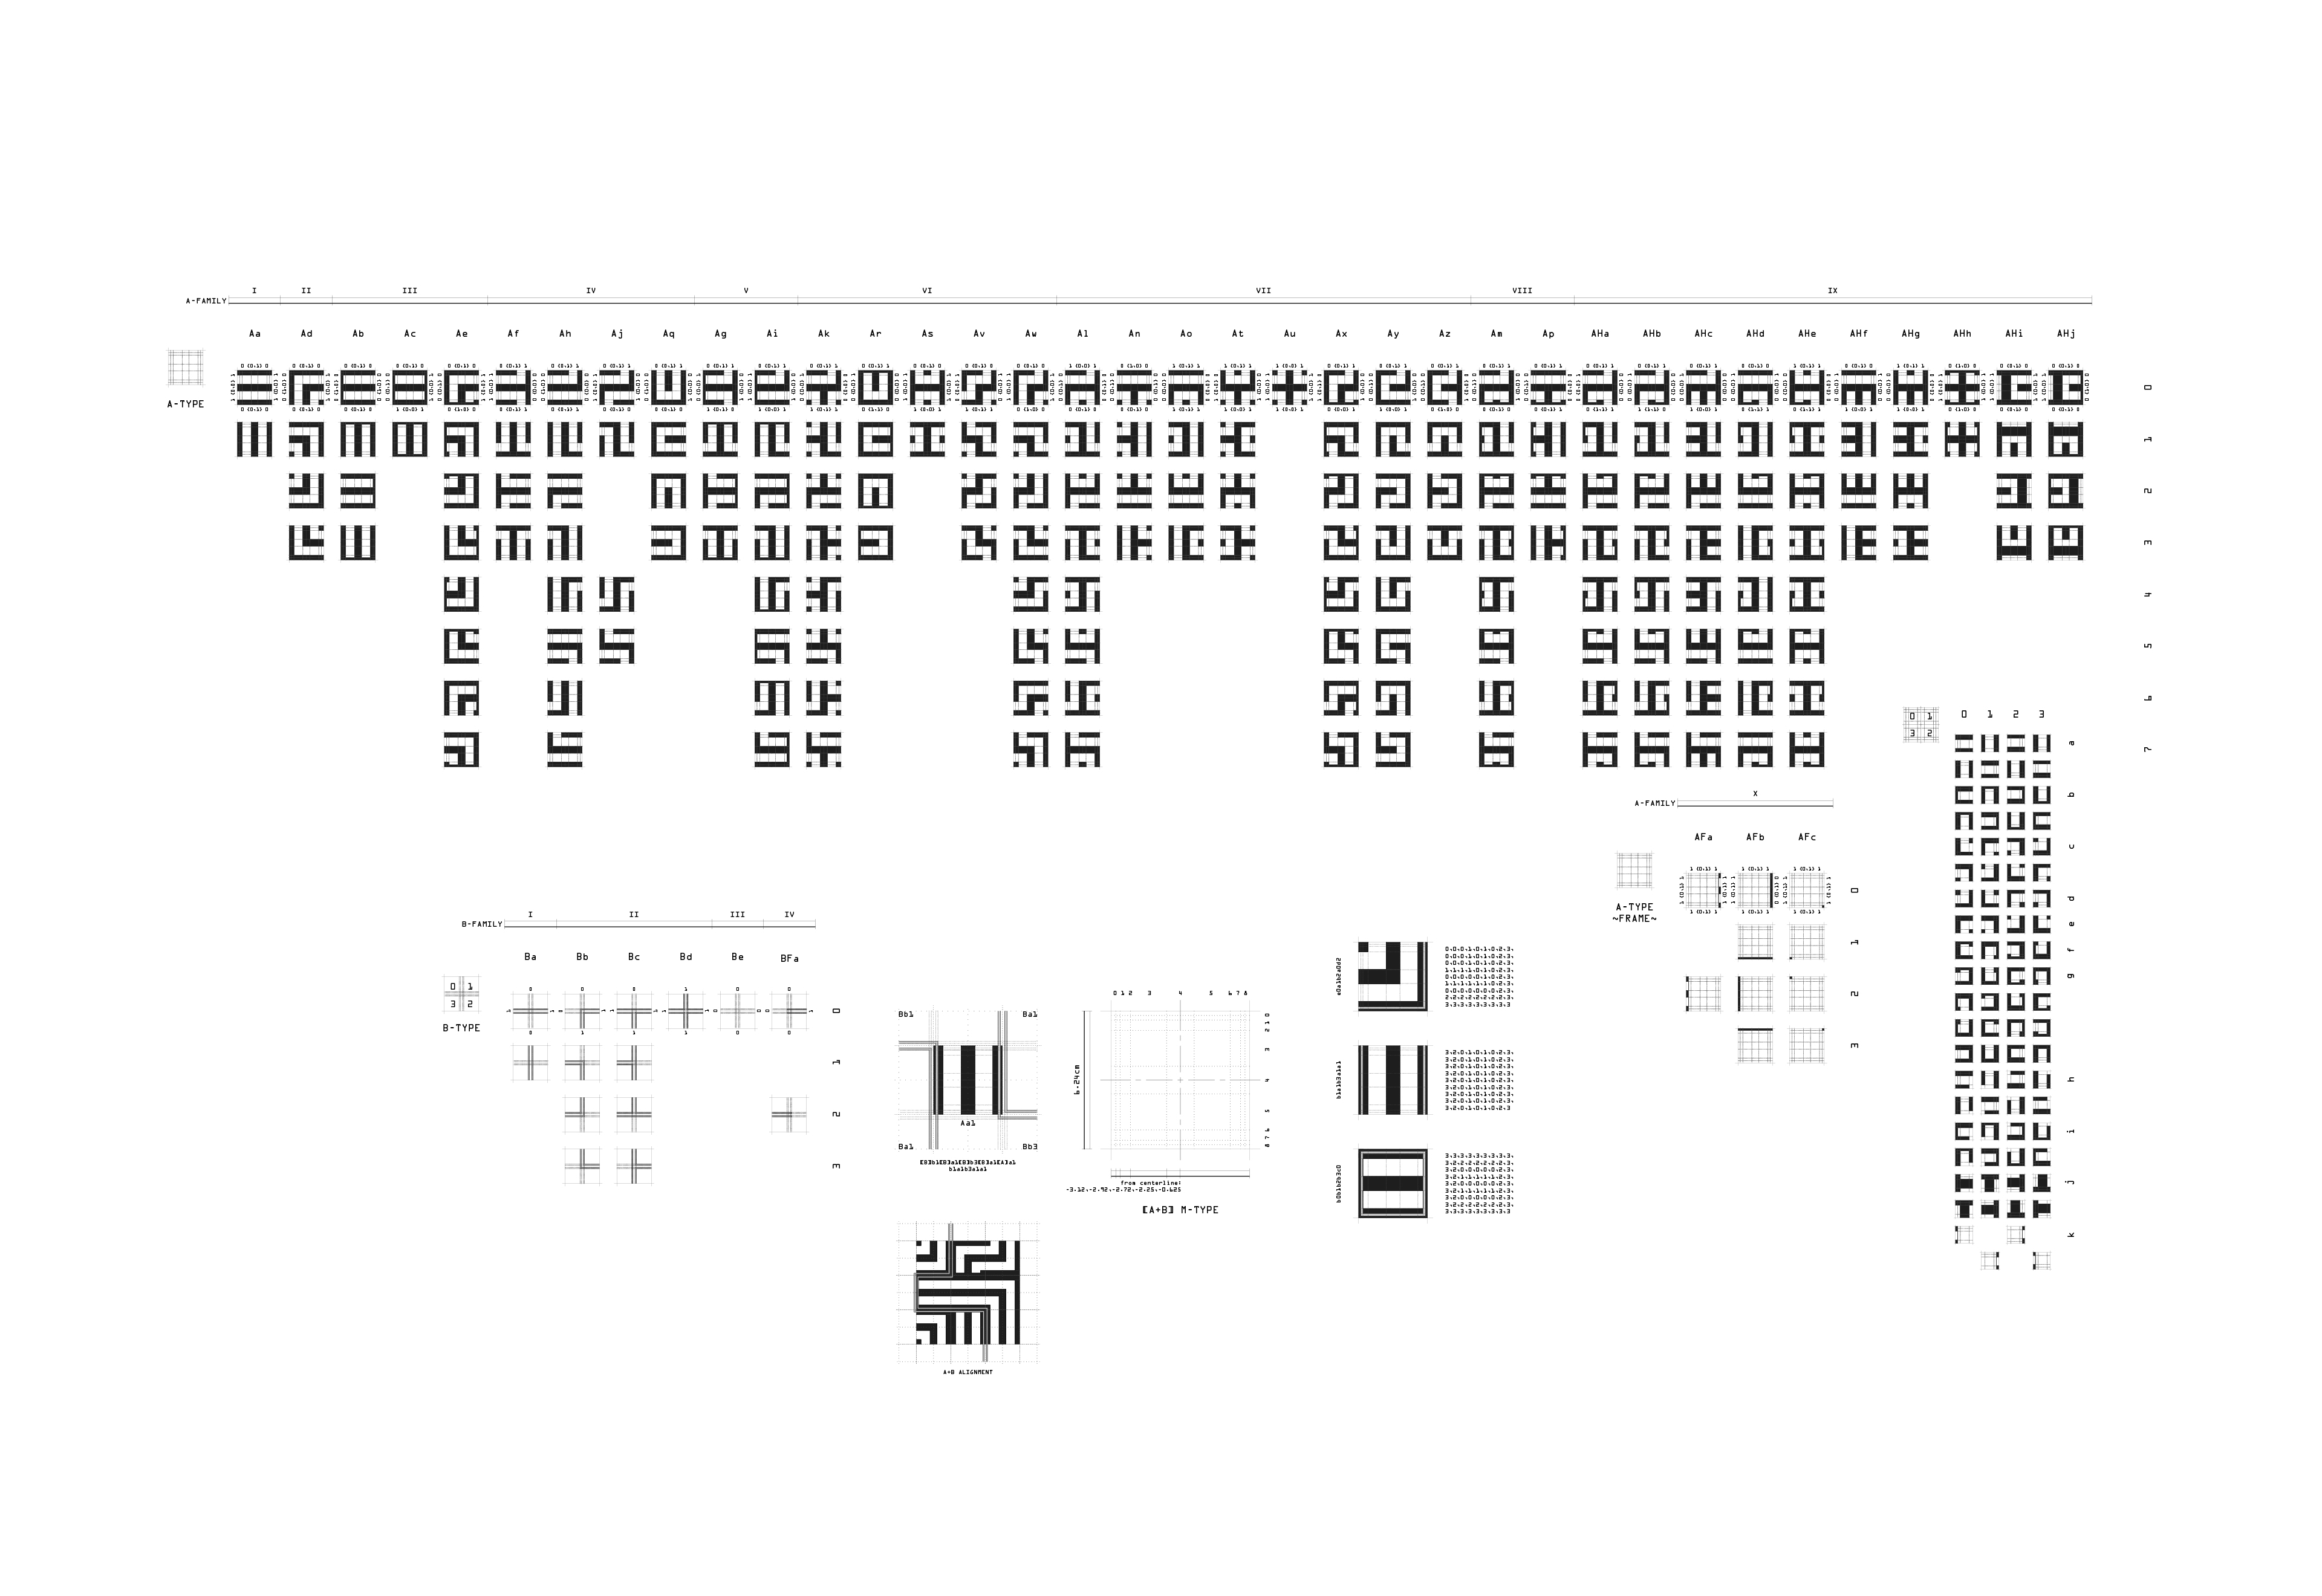 Cell Permutations Chart Including A-Type and B-Type Cells, A-Type Quarters, and a Diagram for Merging A and B Types, Plasticité+, An Implementation of Artificial Intelligence for the Design, Visualization and Digital Fabrication of a Referential Façade of Historical Chinese Art and Architecture, J.Travis Bennett Russett